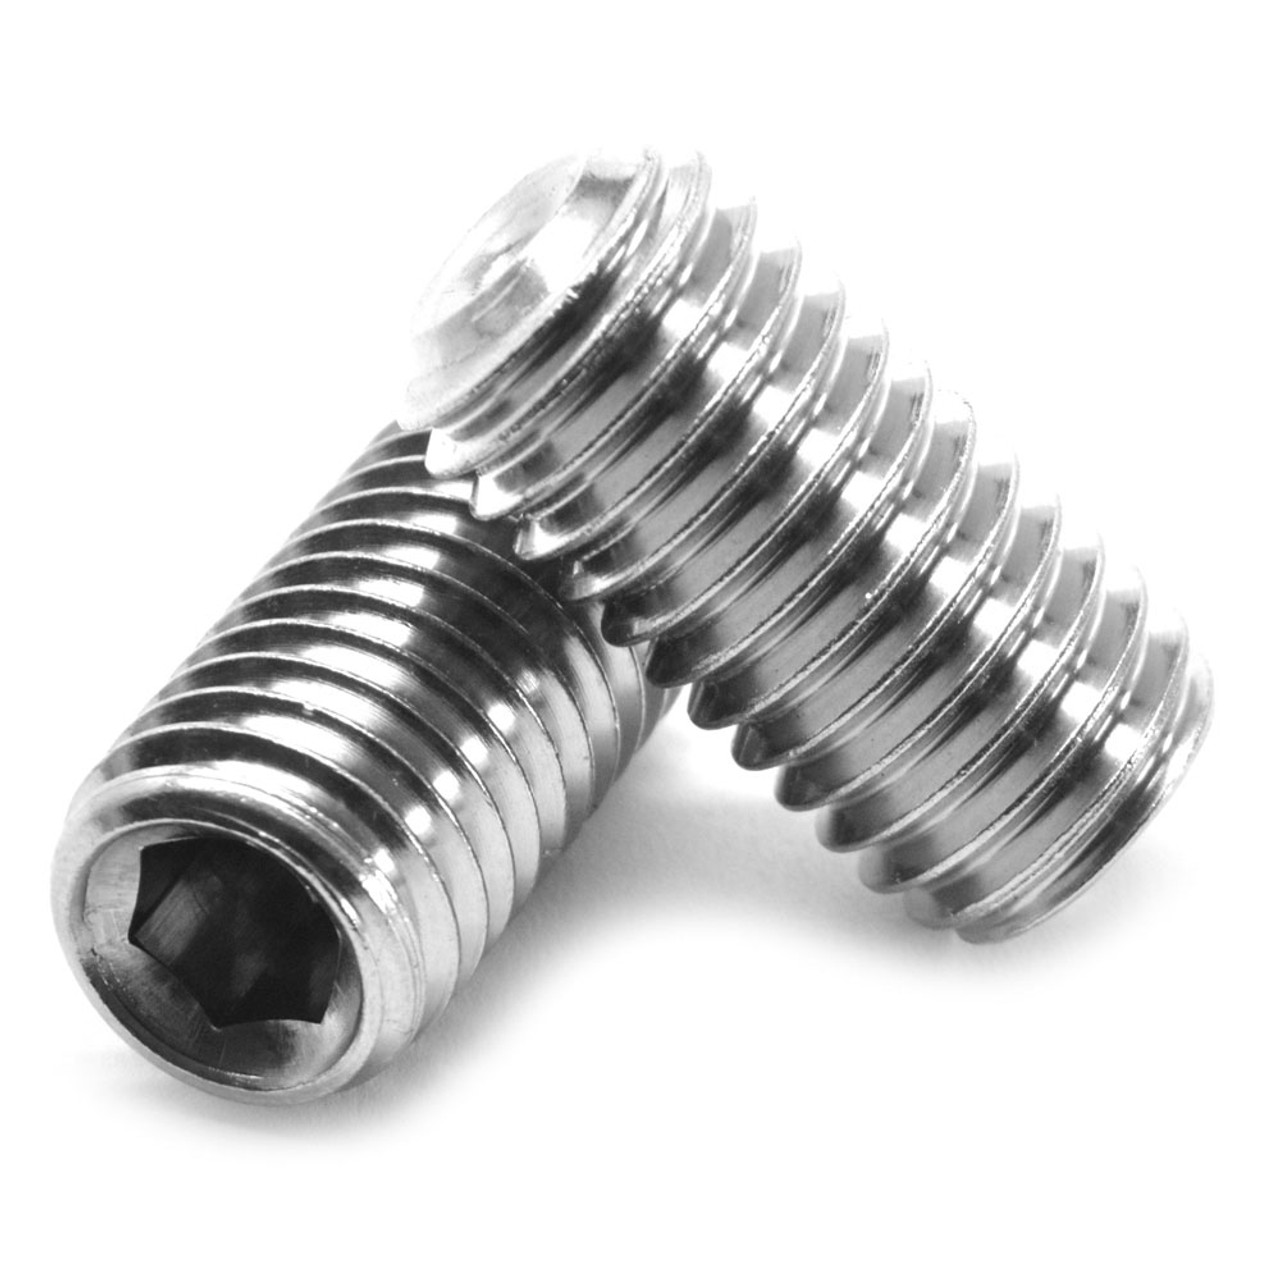 M3 x 0.50 x 16 MM Coarse Thread DIN 916 / ISO 4029 Socket Set Screw Cup Point Stainless Steel 18-8